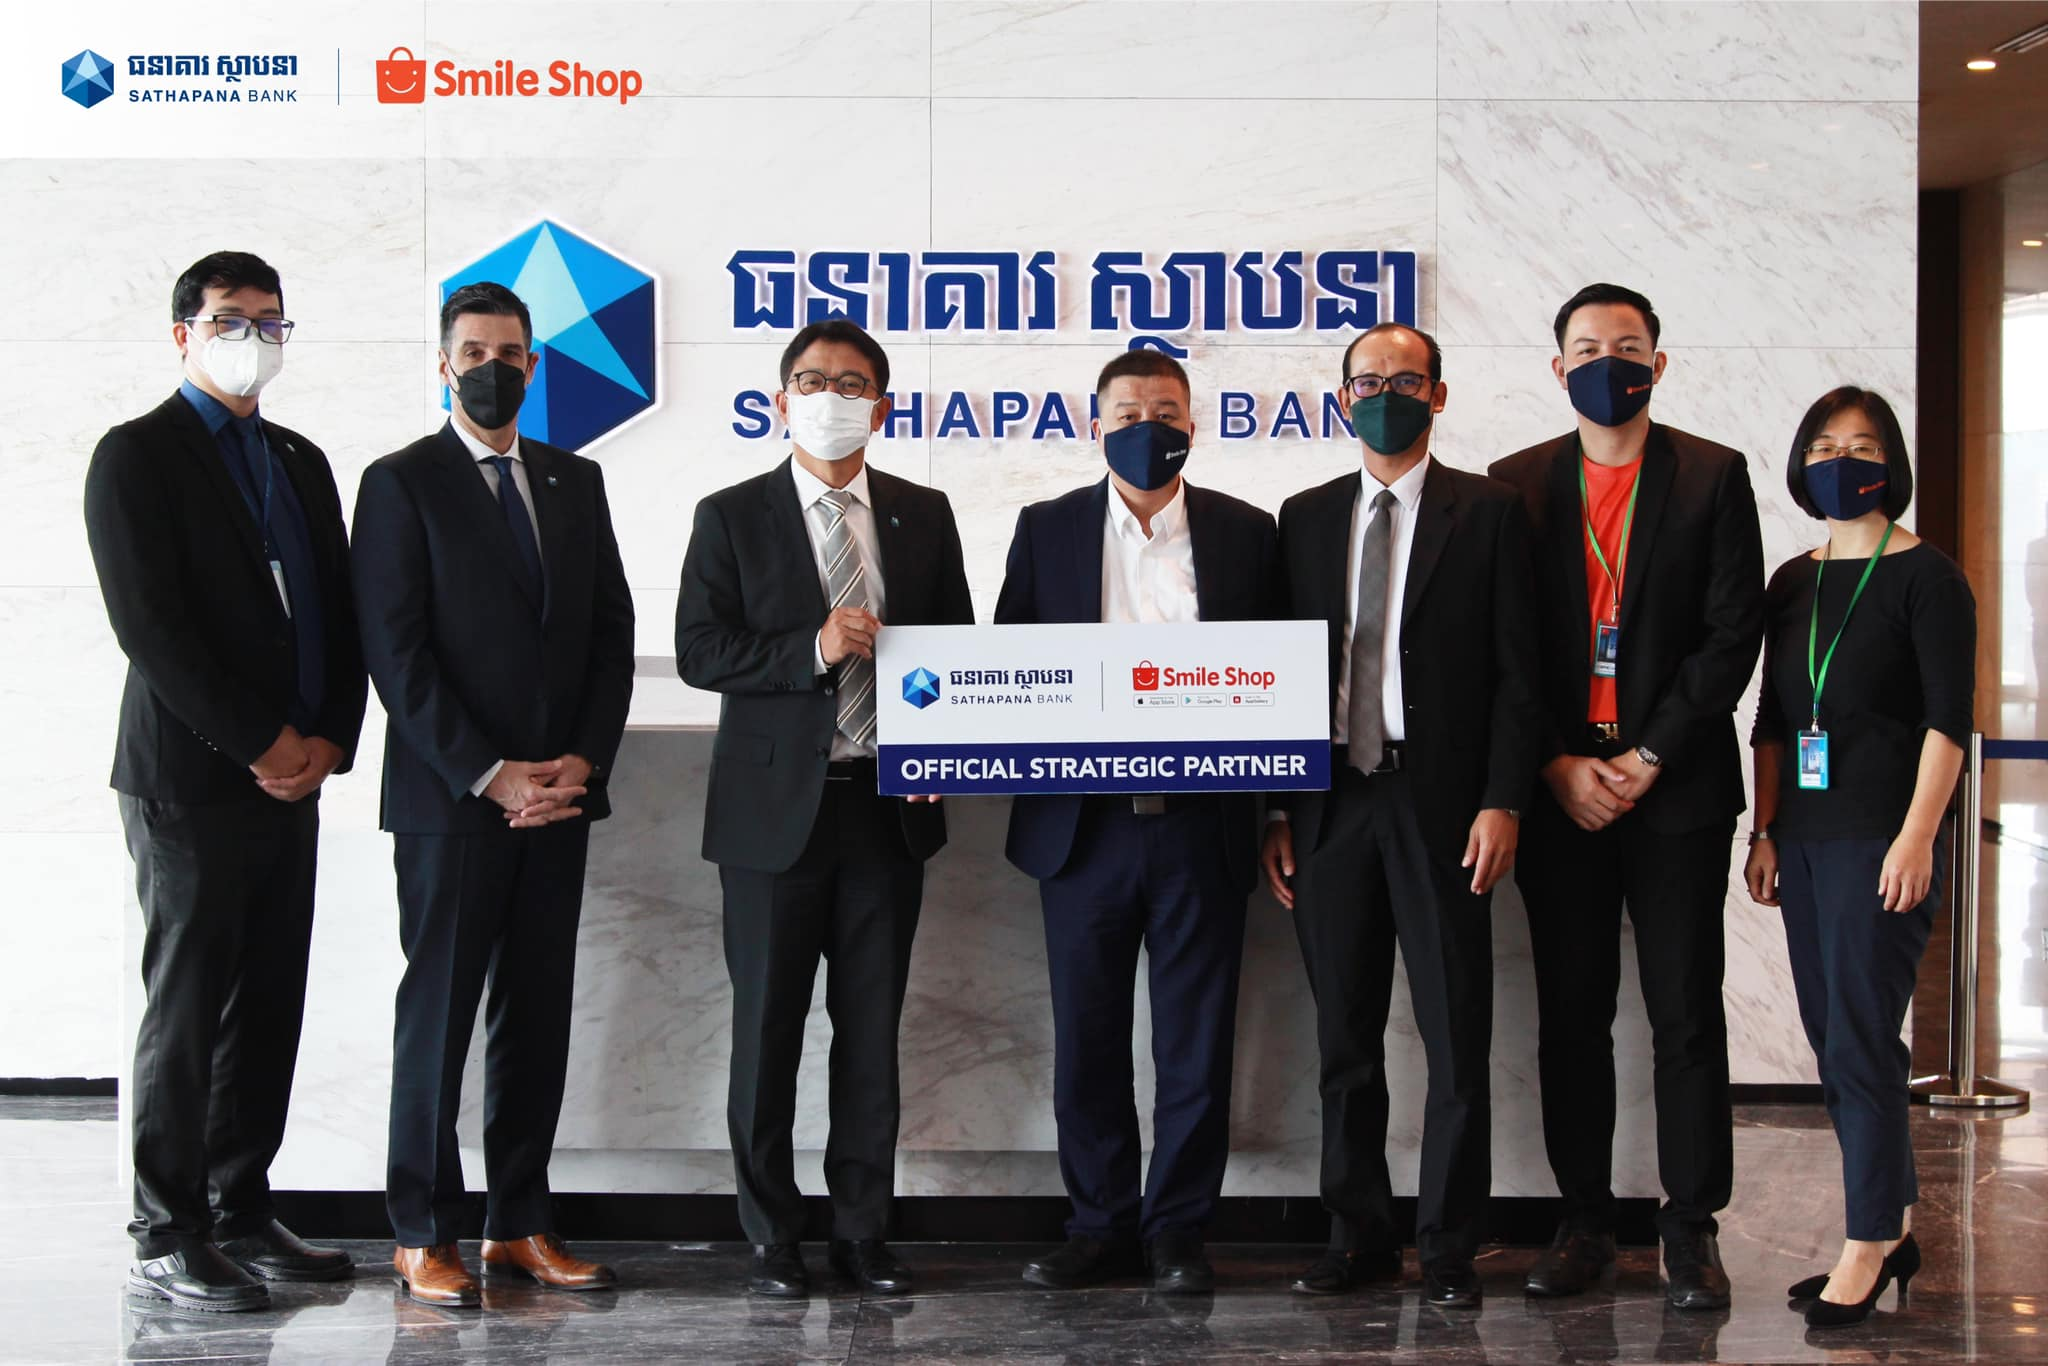 Payment gateways and BNPL development as Smile Shop and Sathapana sign partnership agreement